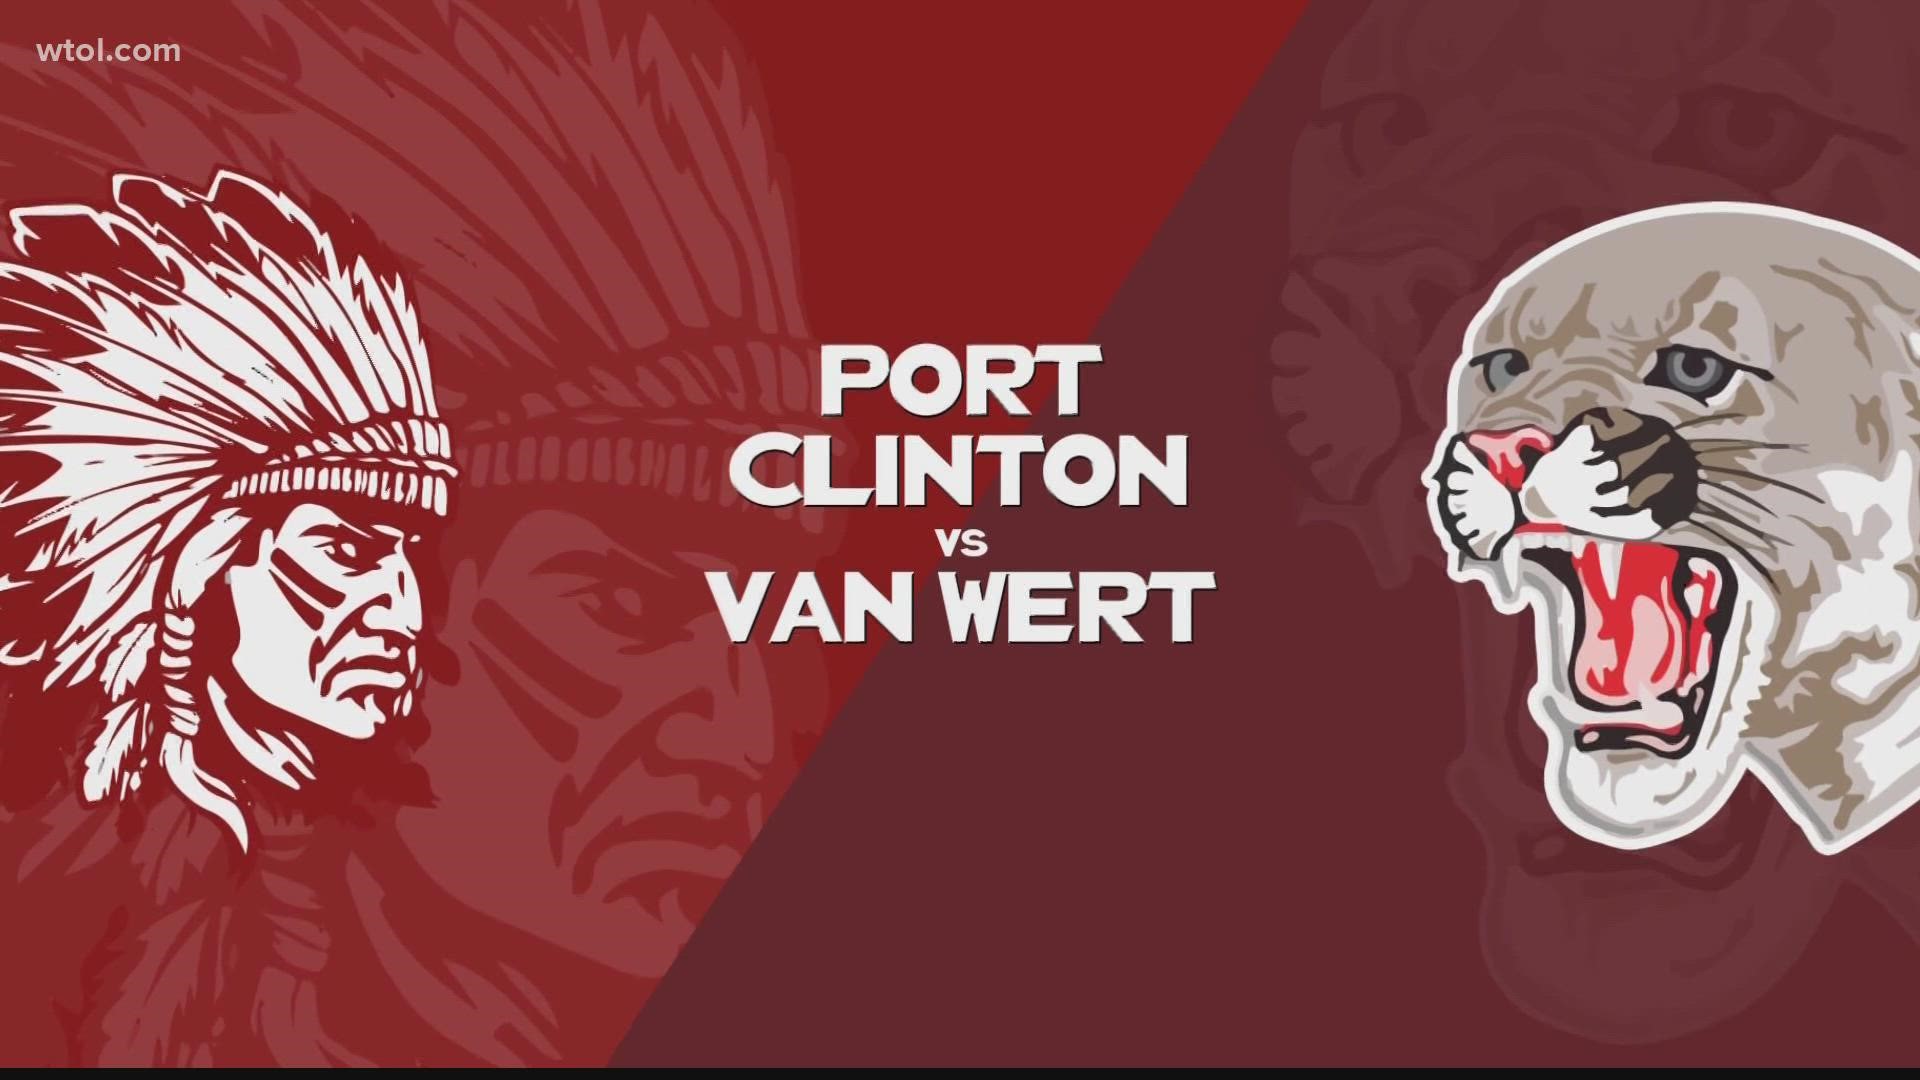 Division IV. Port Clinton having their best season in school history. Redskins facing defending state champs Van Wert. Can they make history with an upset?